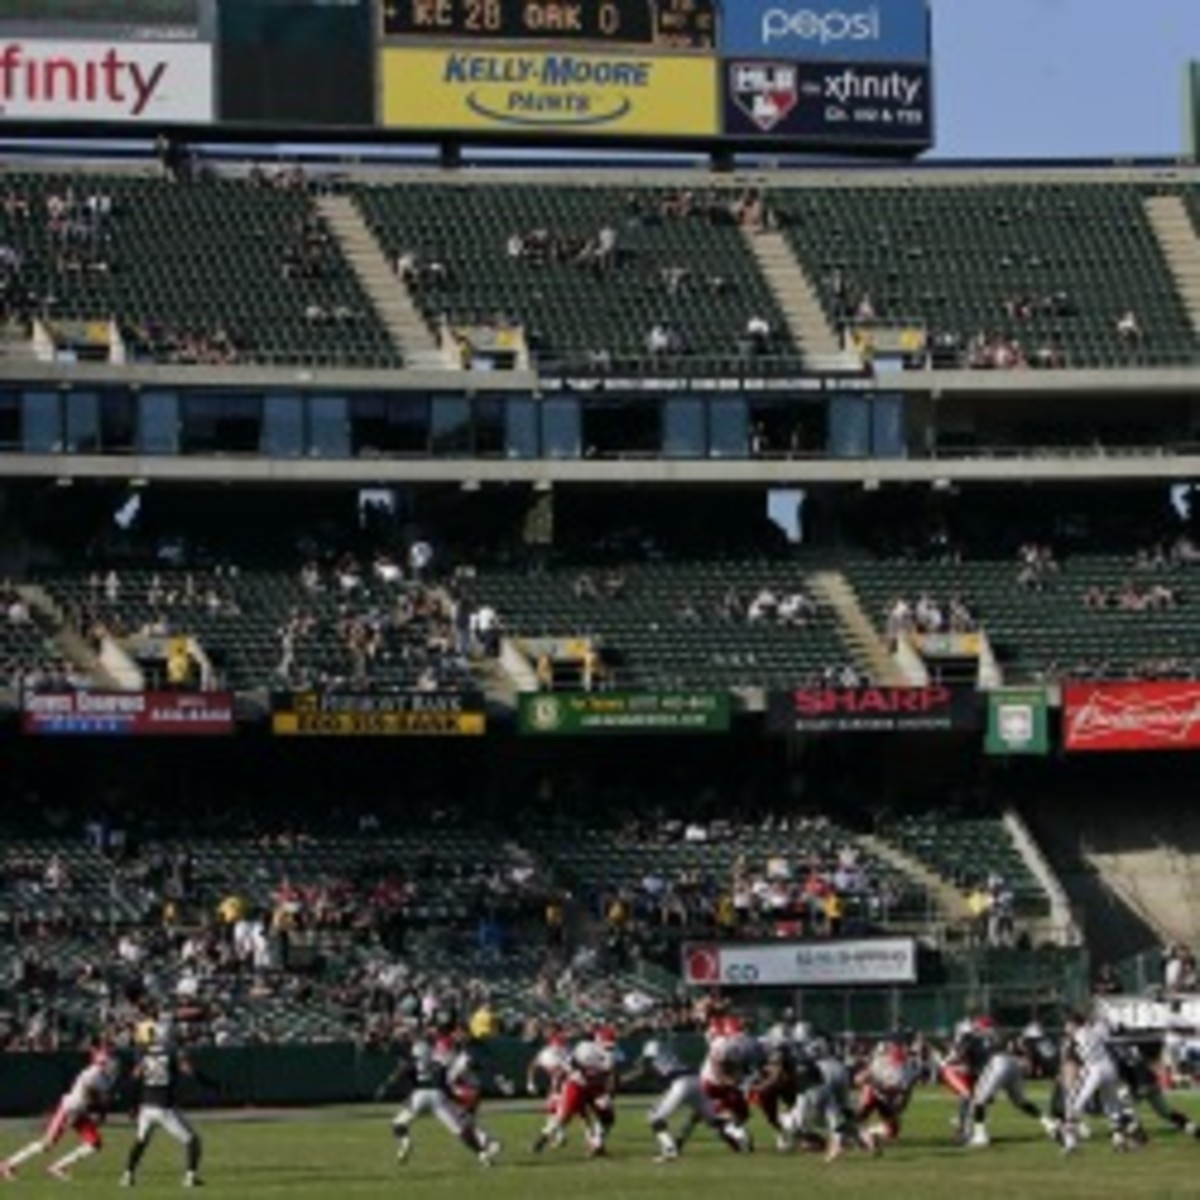 O.com Coliseum is set to have a capacity just over 53,000 for football games. (Brian Bahr/Getty Images)